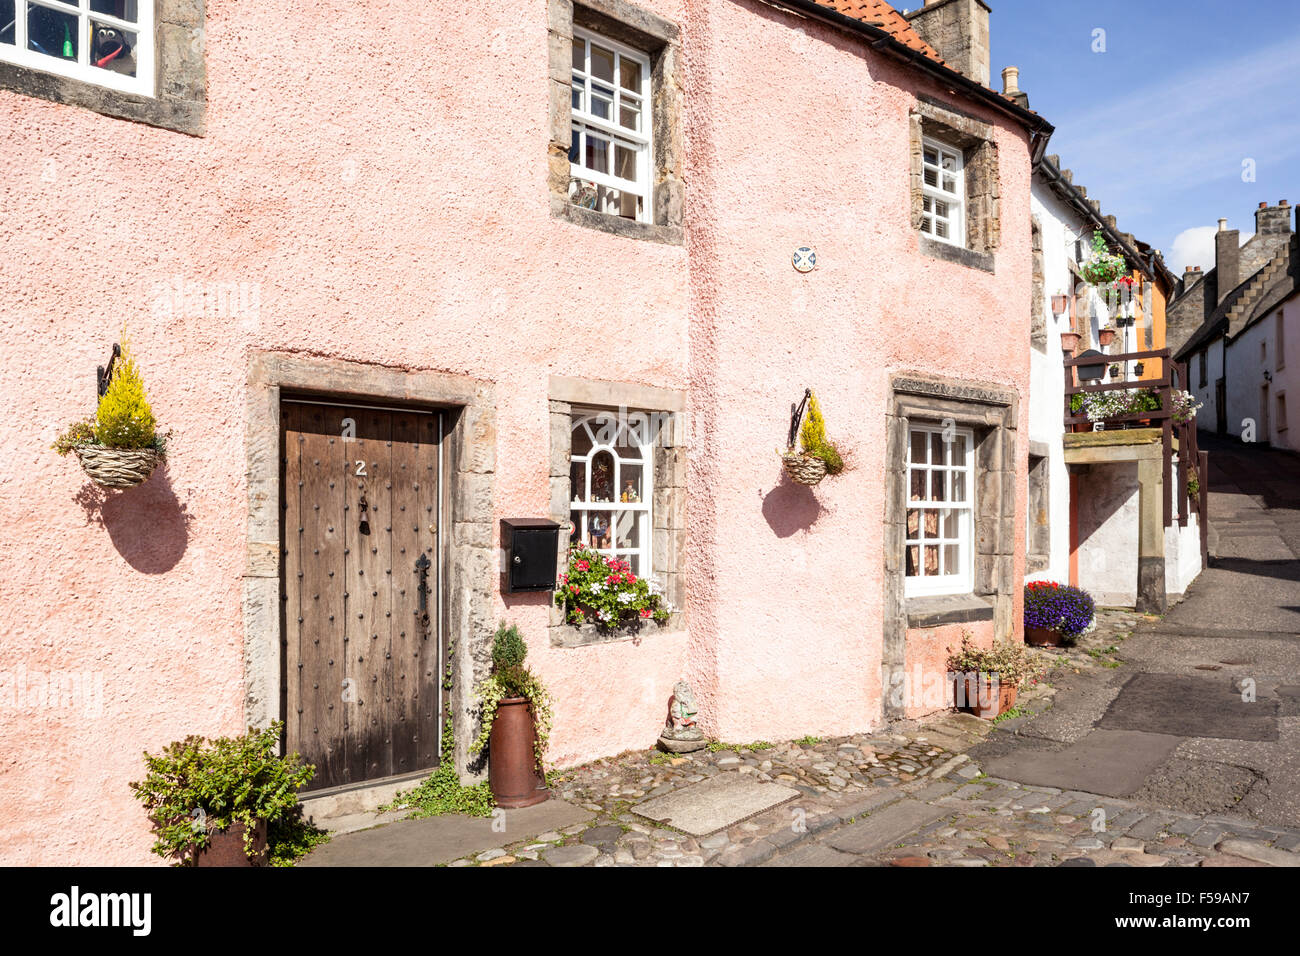 Historic buildings in Tanhouse Brae in the Royal Burgh of Culross, Fife, Scotland UK Stock Photo